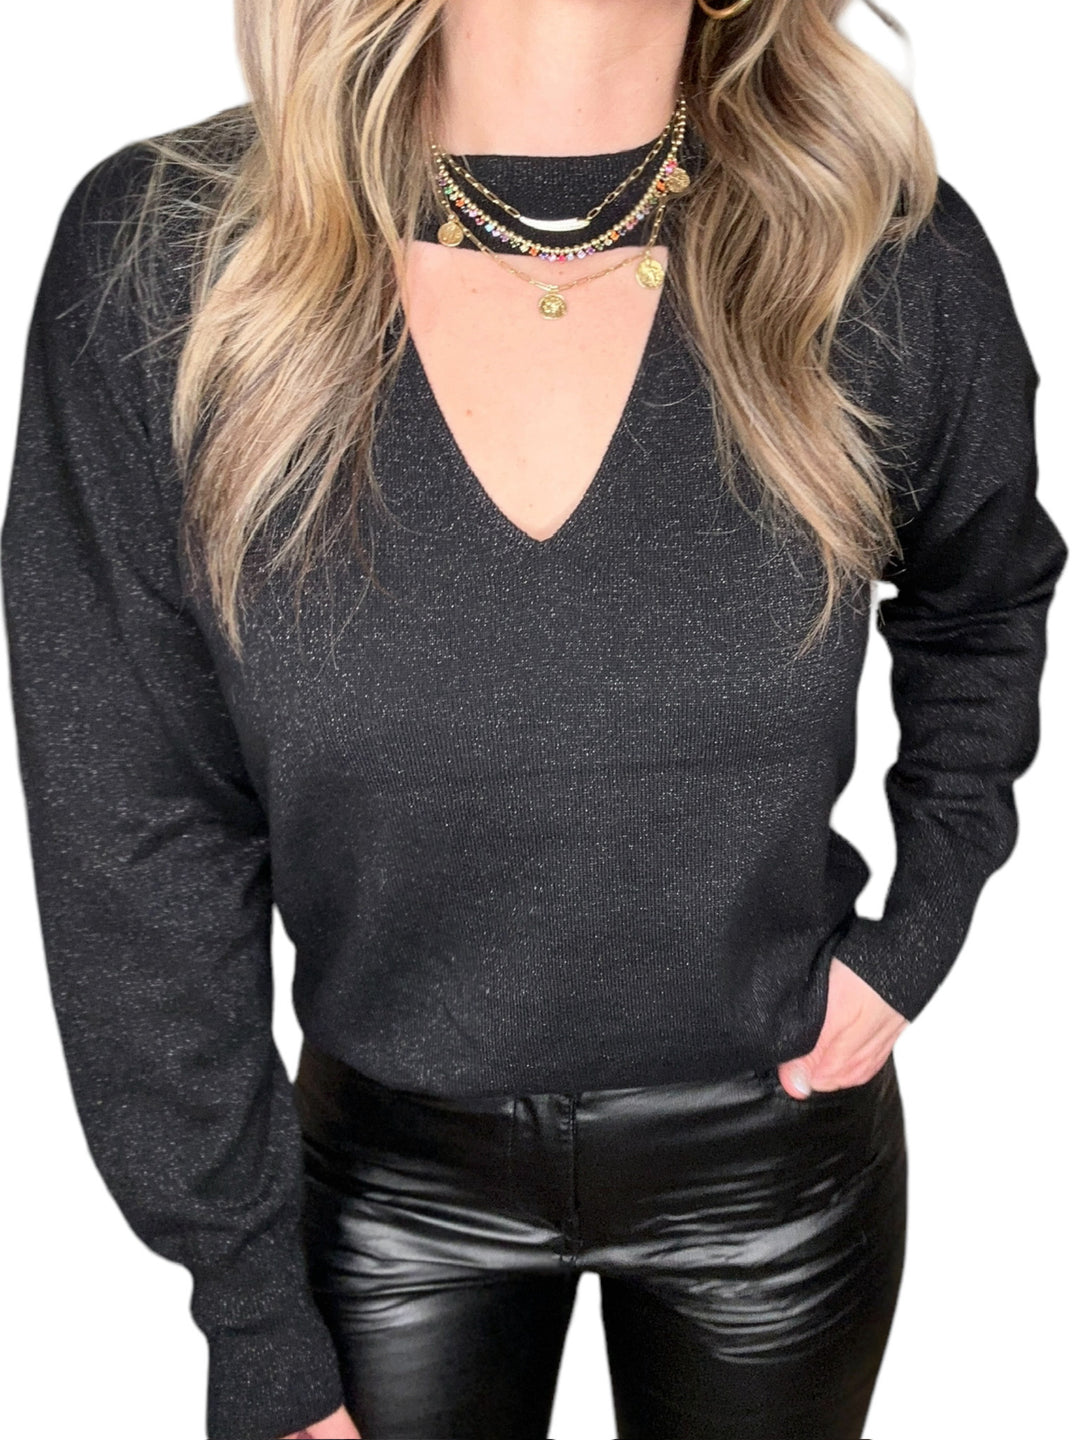 CUT-OUT SWEATER-BLACK - Kingfisher Road - Online Boutique